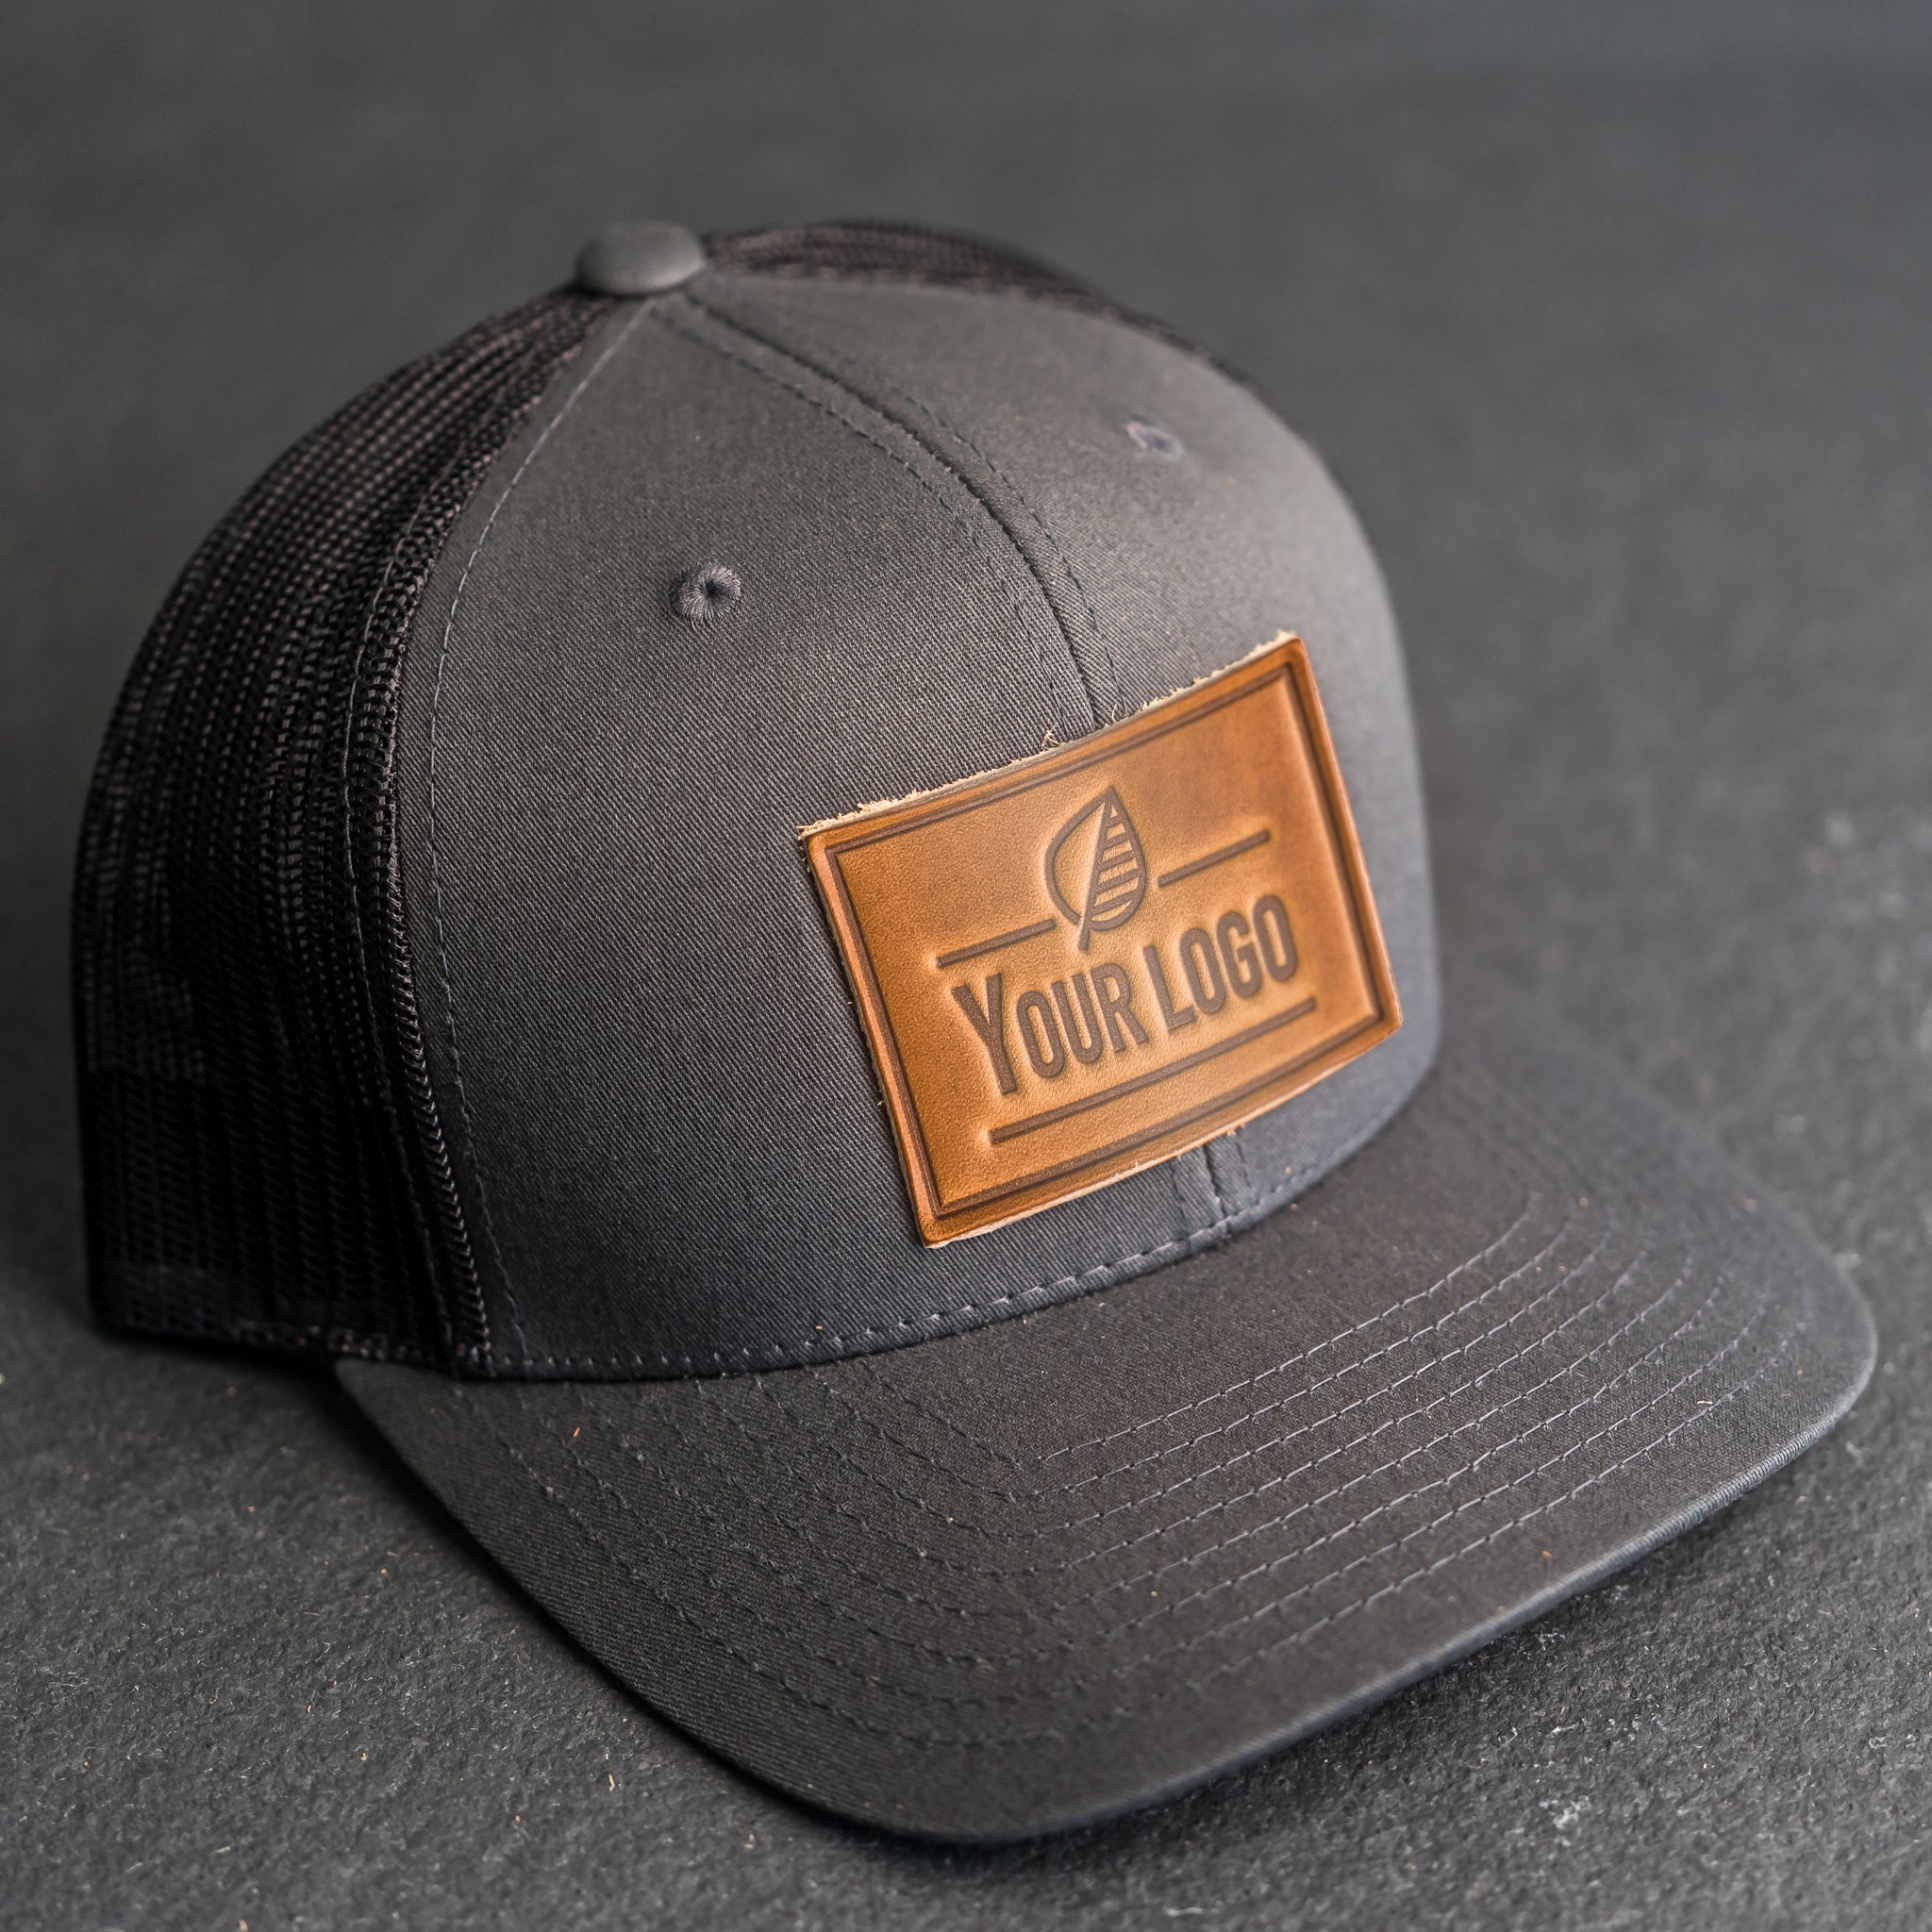 Custom Patch Hats - Preview Your Logo